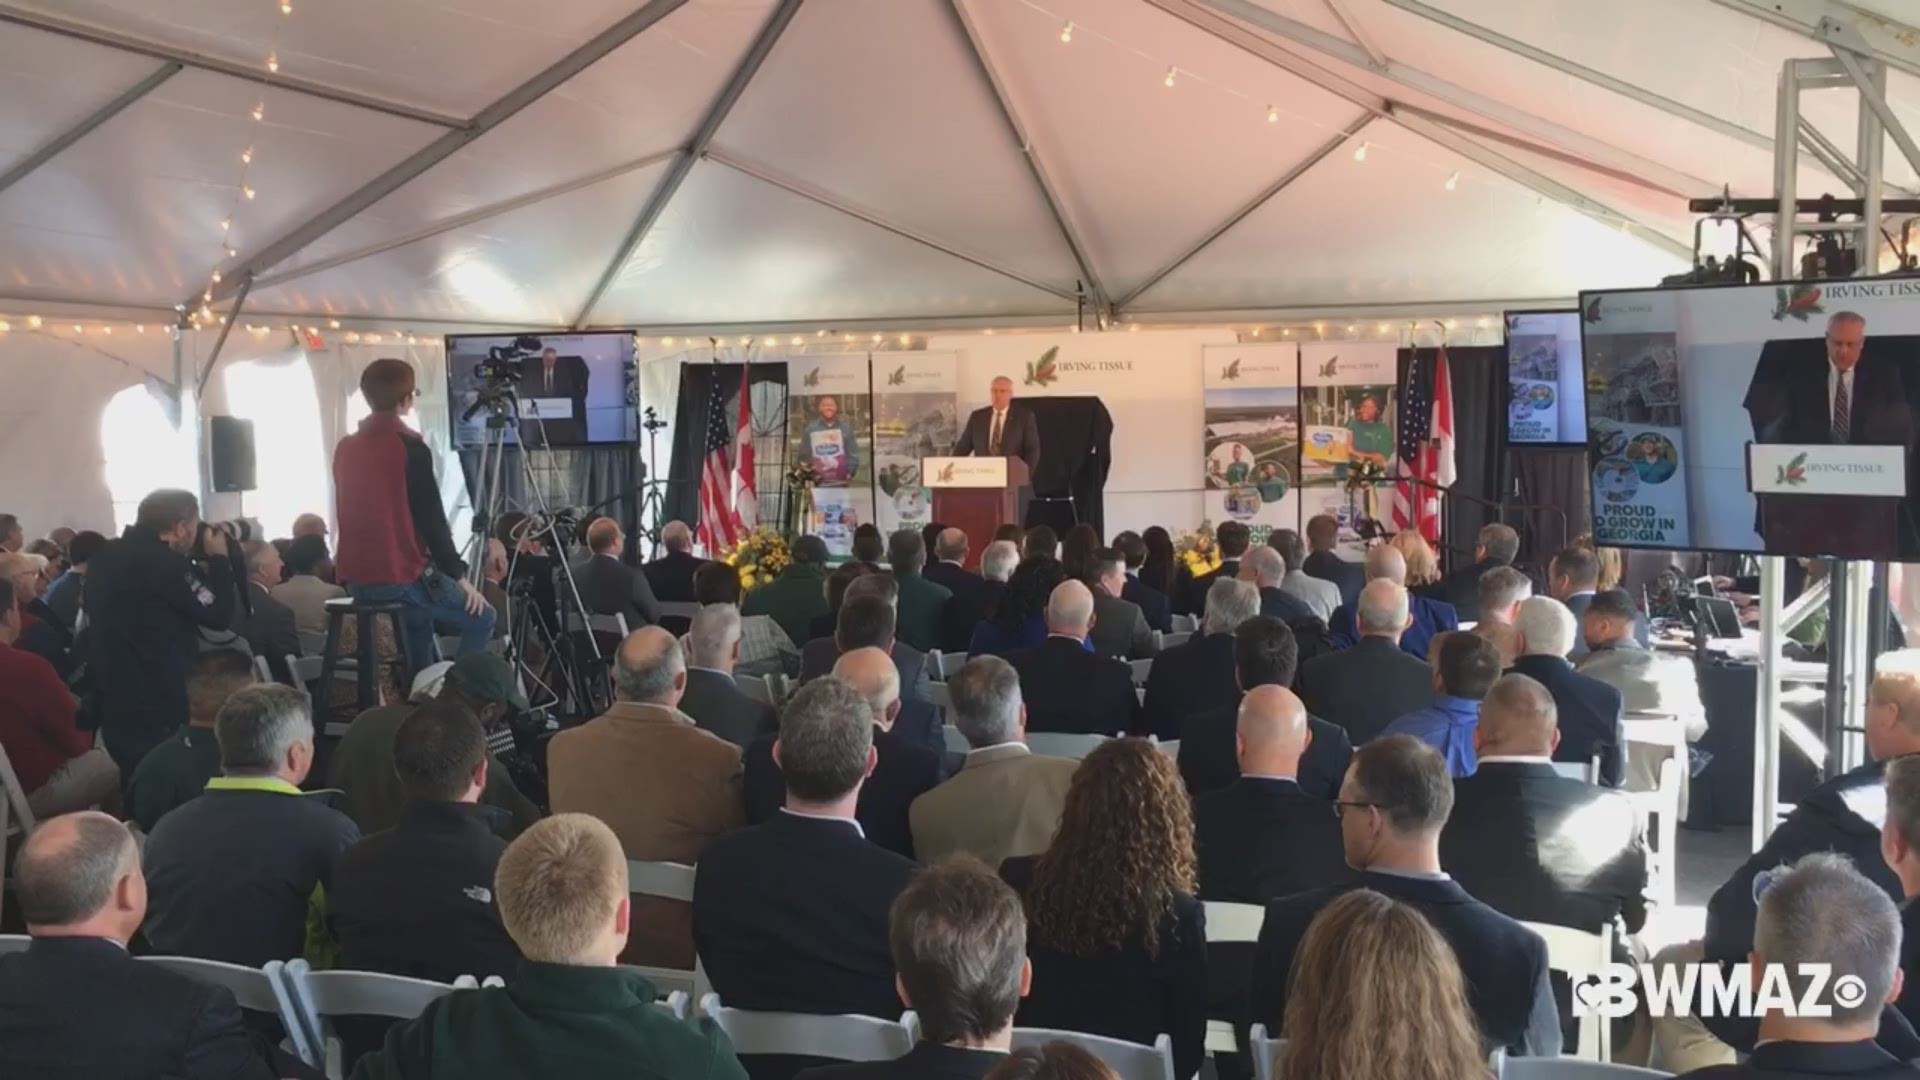 J.D. Irving, a tissue-paper plant, had their grand opening Wednesday in Macon. It's located off Allen Road and is set to bring 200 jobs.